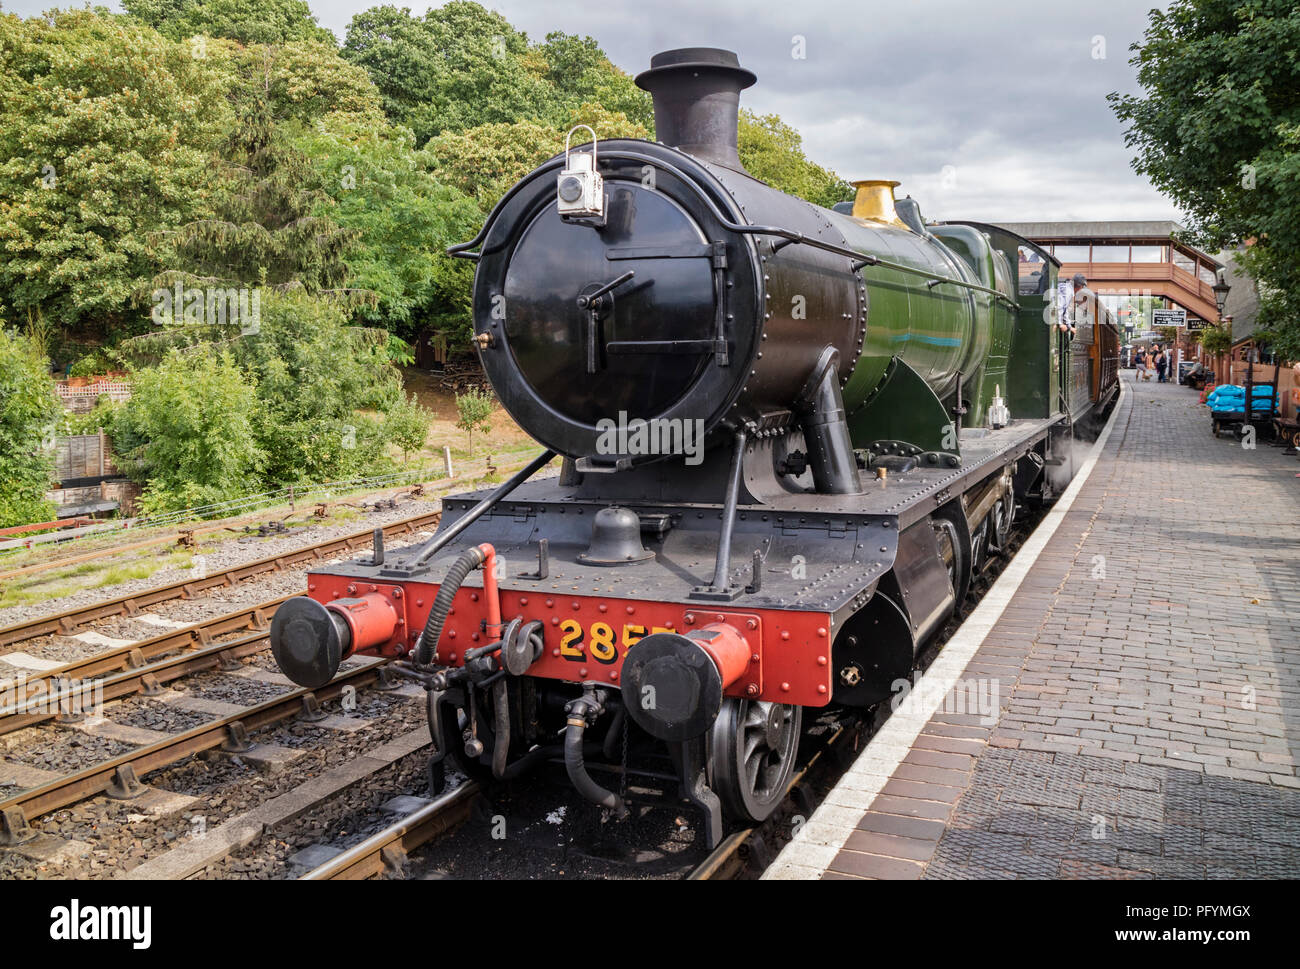 A steam train at Bewdley station on the Severn Valley Railway, Bewdley, Worcestershire, England, UK Stock Photo